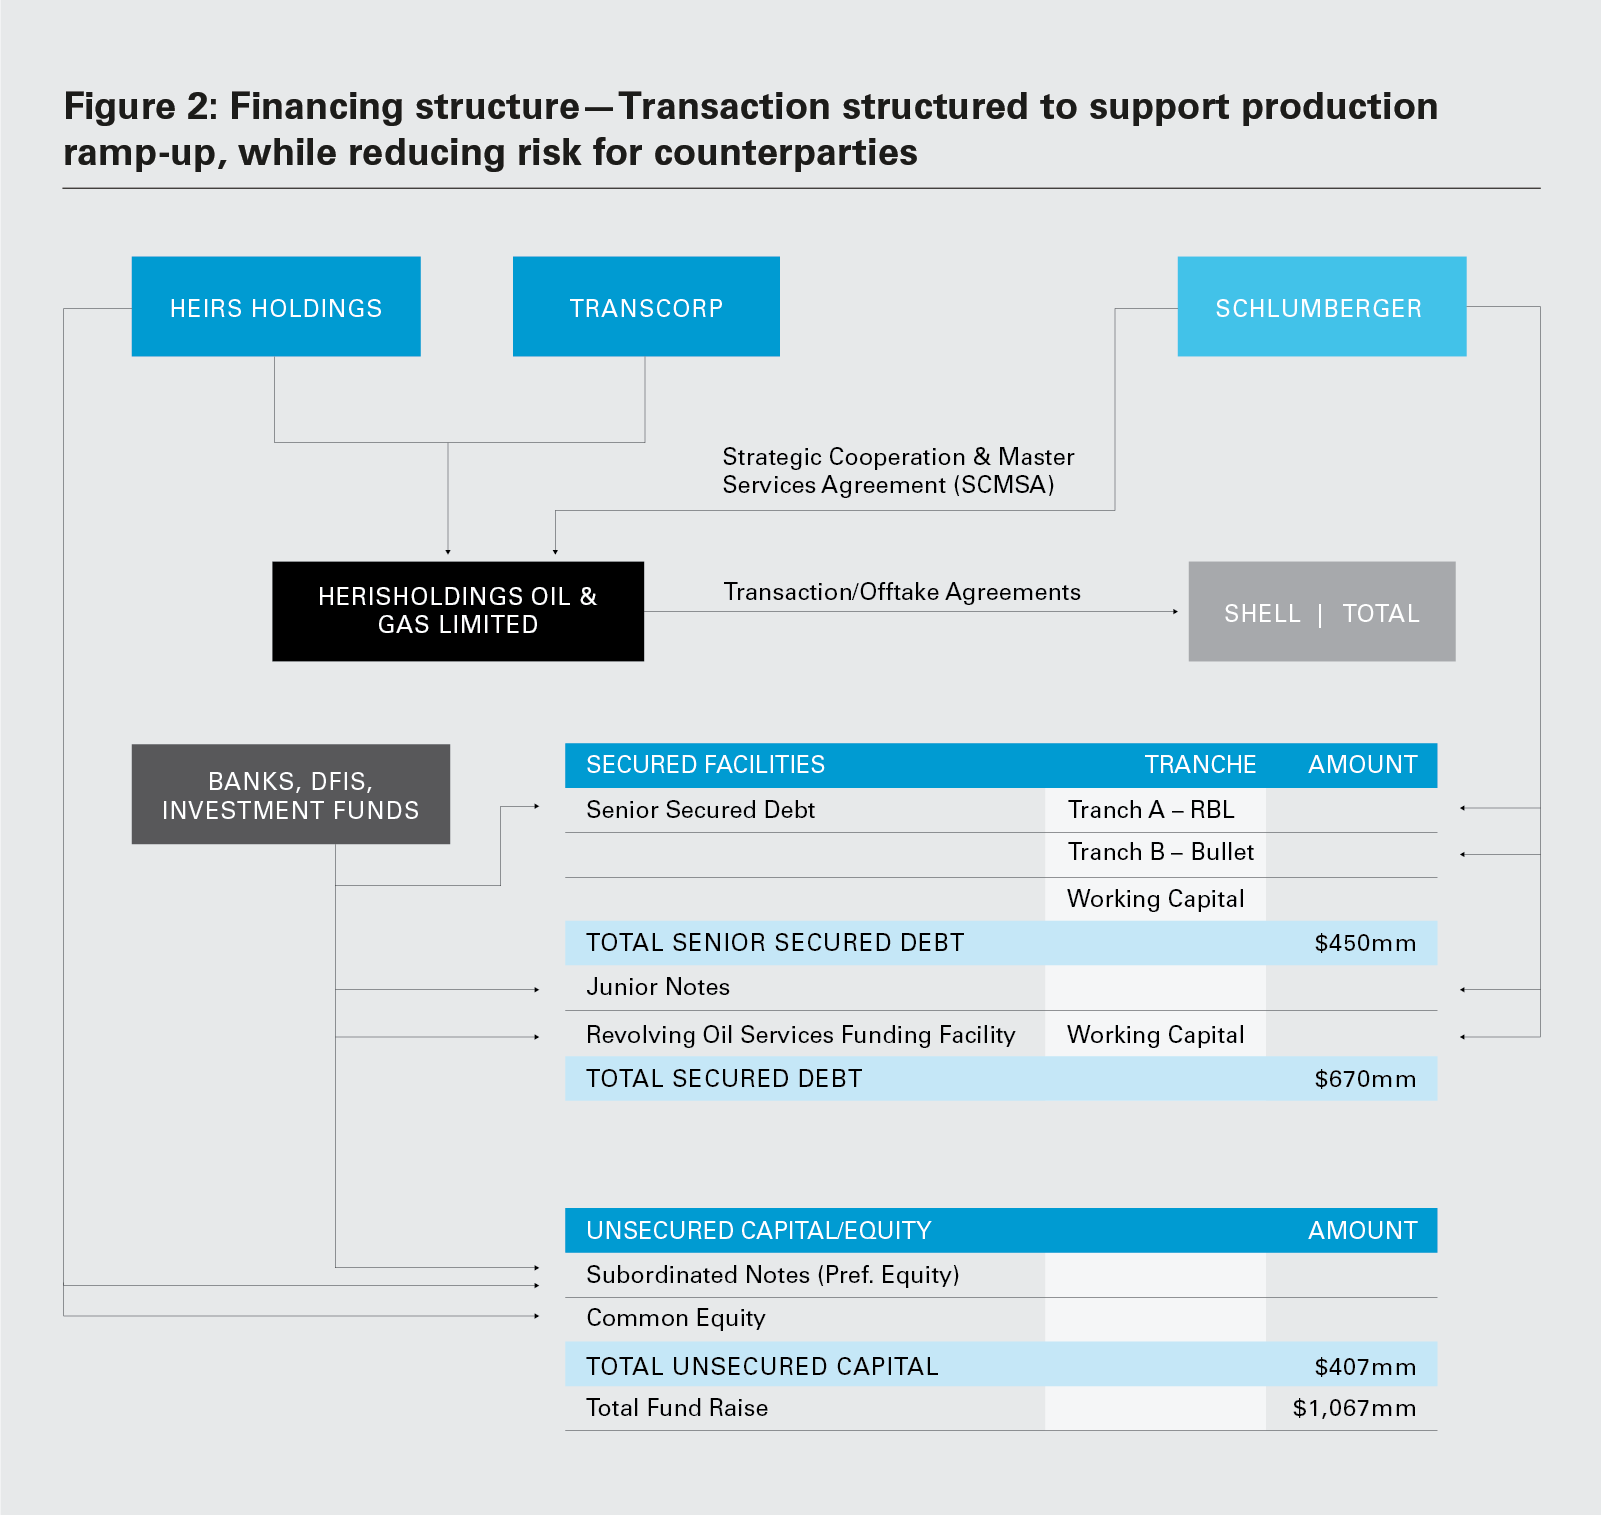 Figure 2: Financing structure—Transaction structured to support production ramp-up, while reducing risk for counterparties